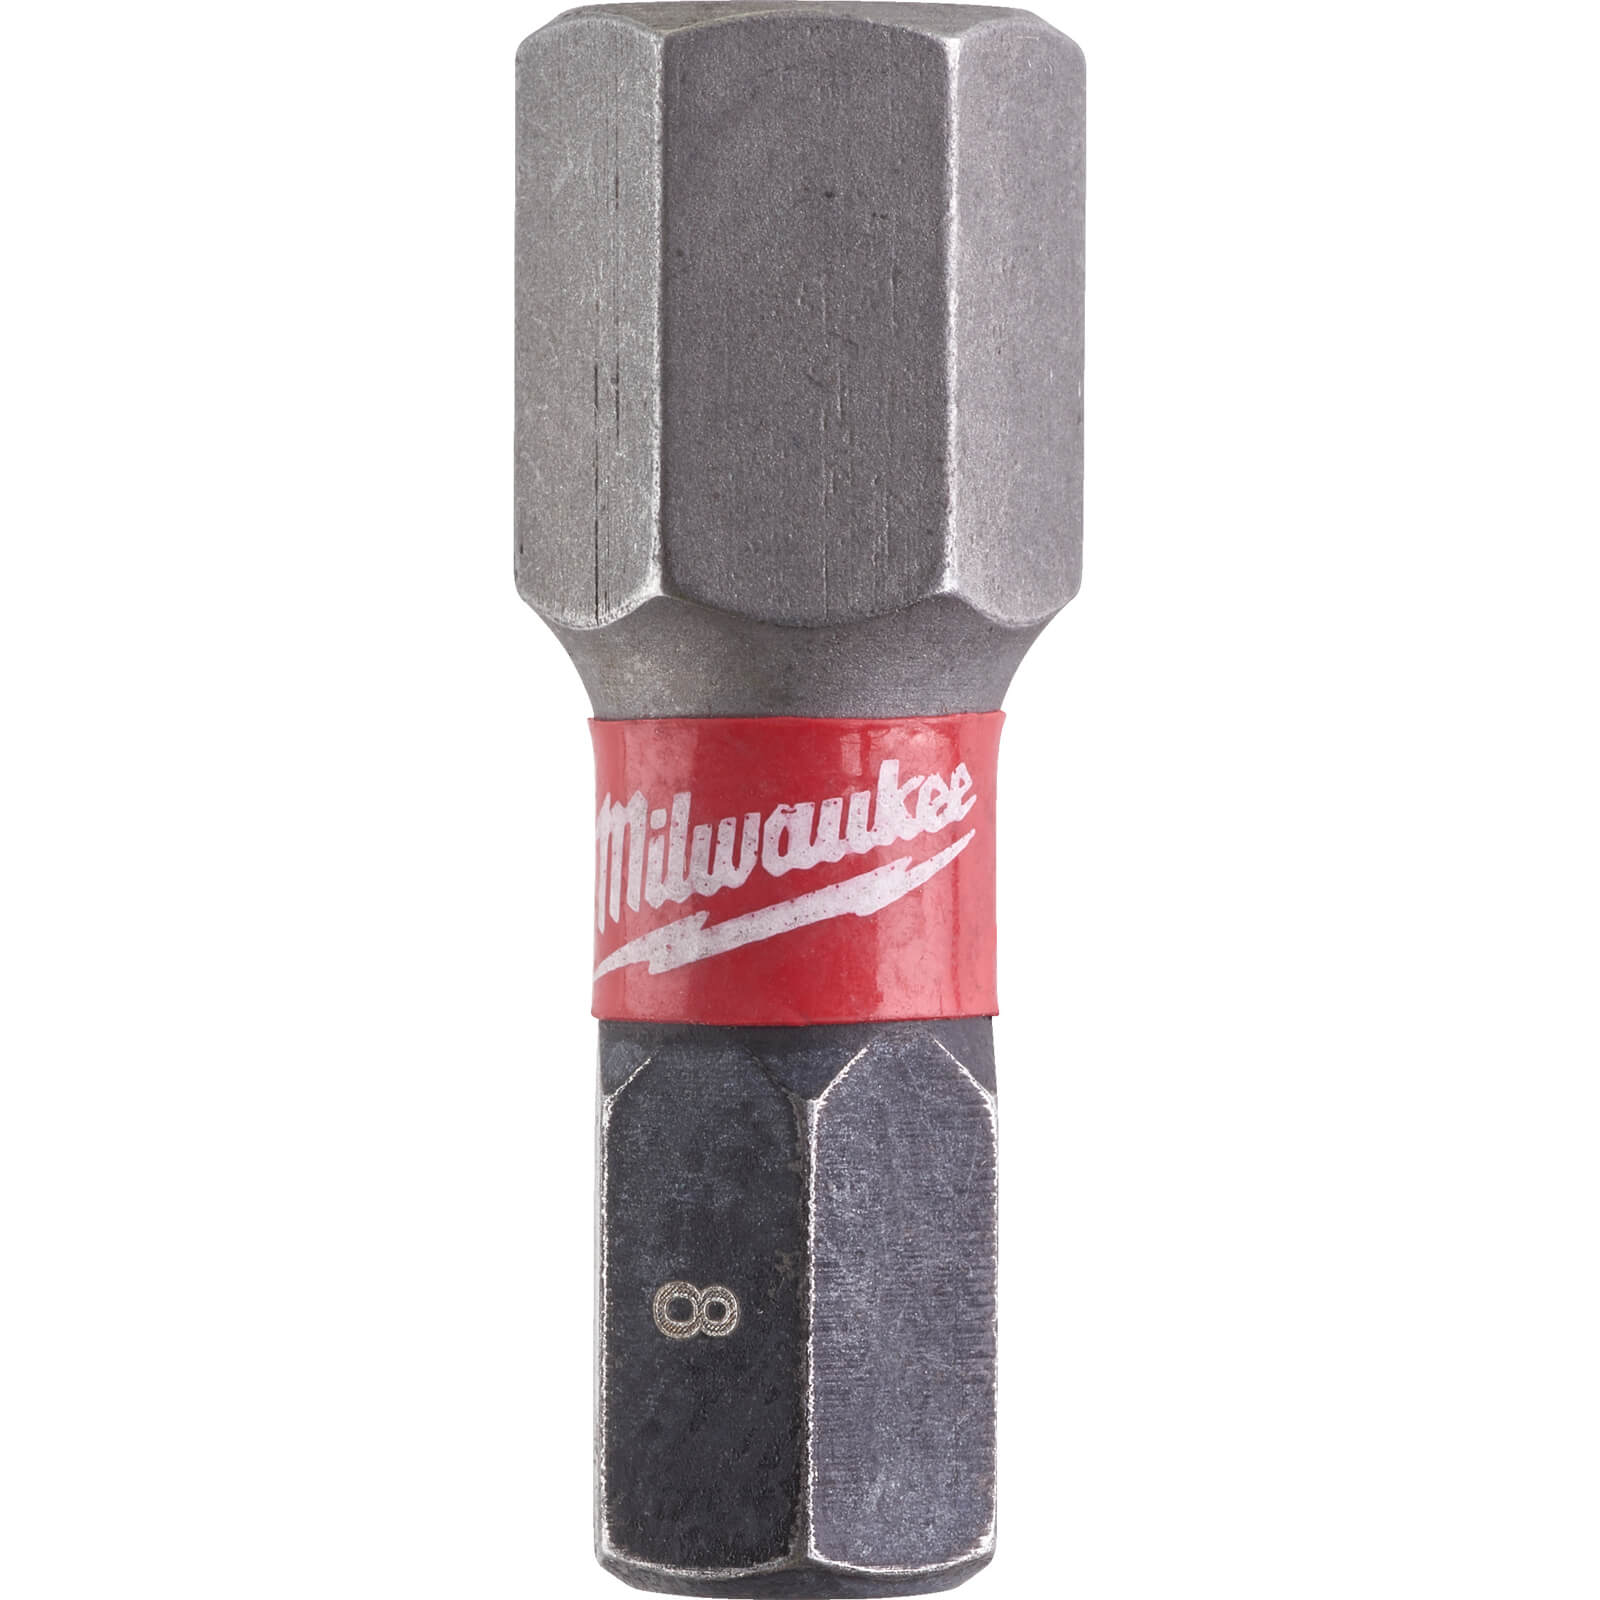 Photos - Bits / Sockets Milwaukee Shockwave Impact Duty Hex Screwdriver Bits Hex 8mm 25mm Pack of 